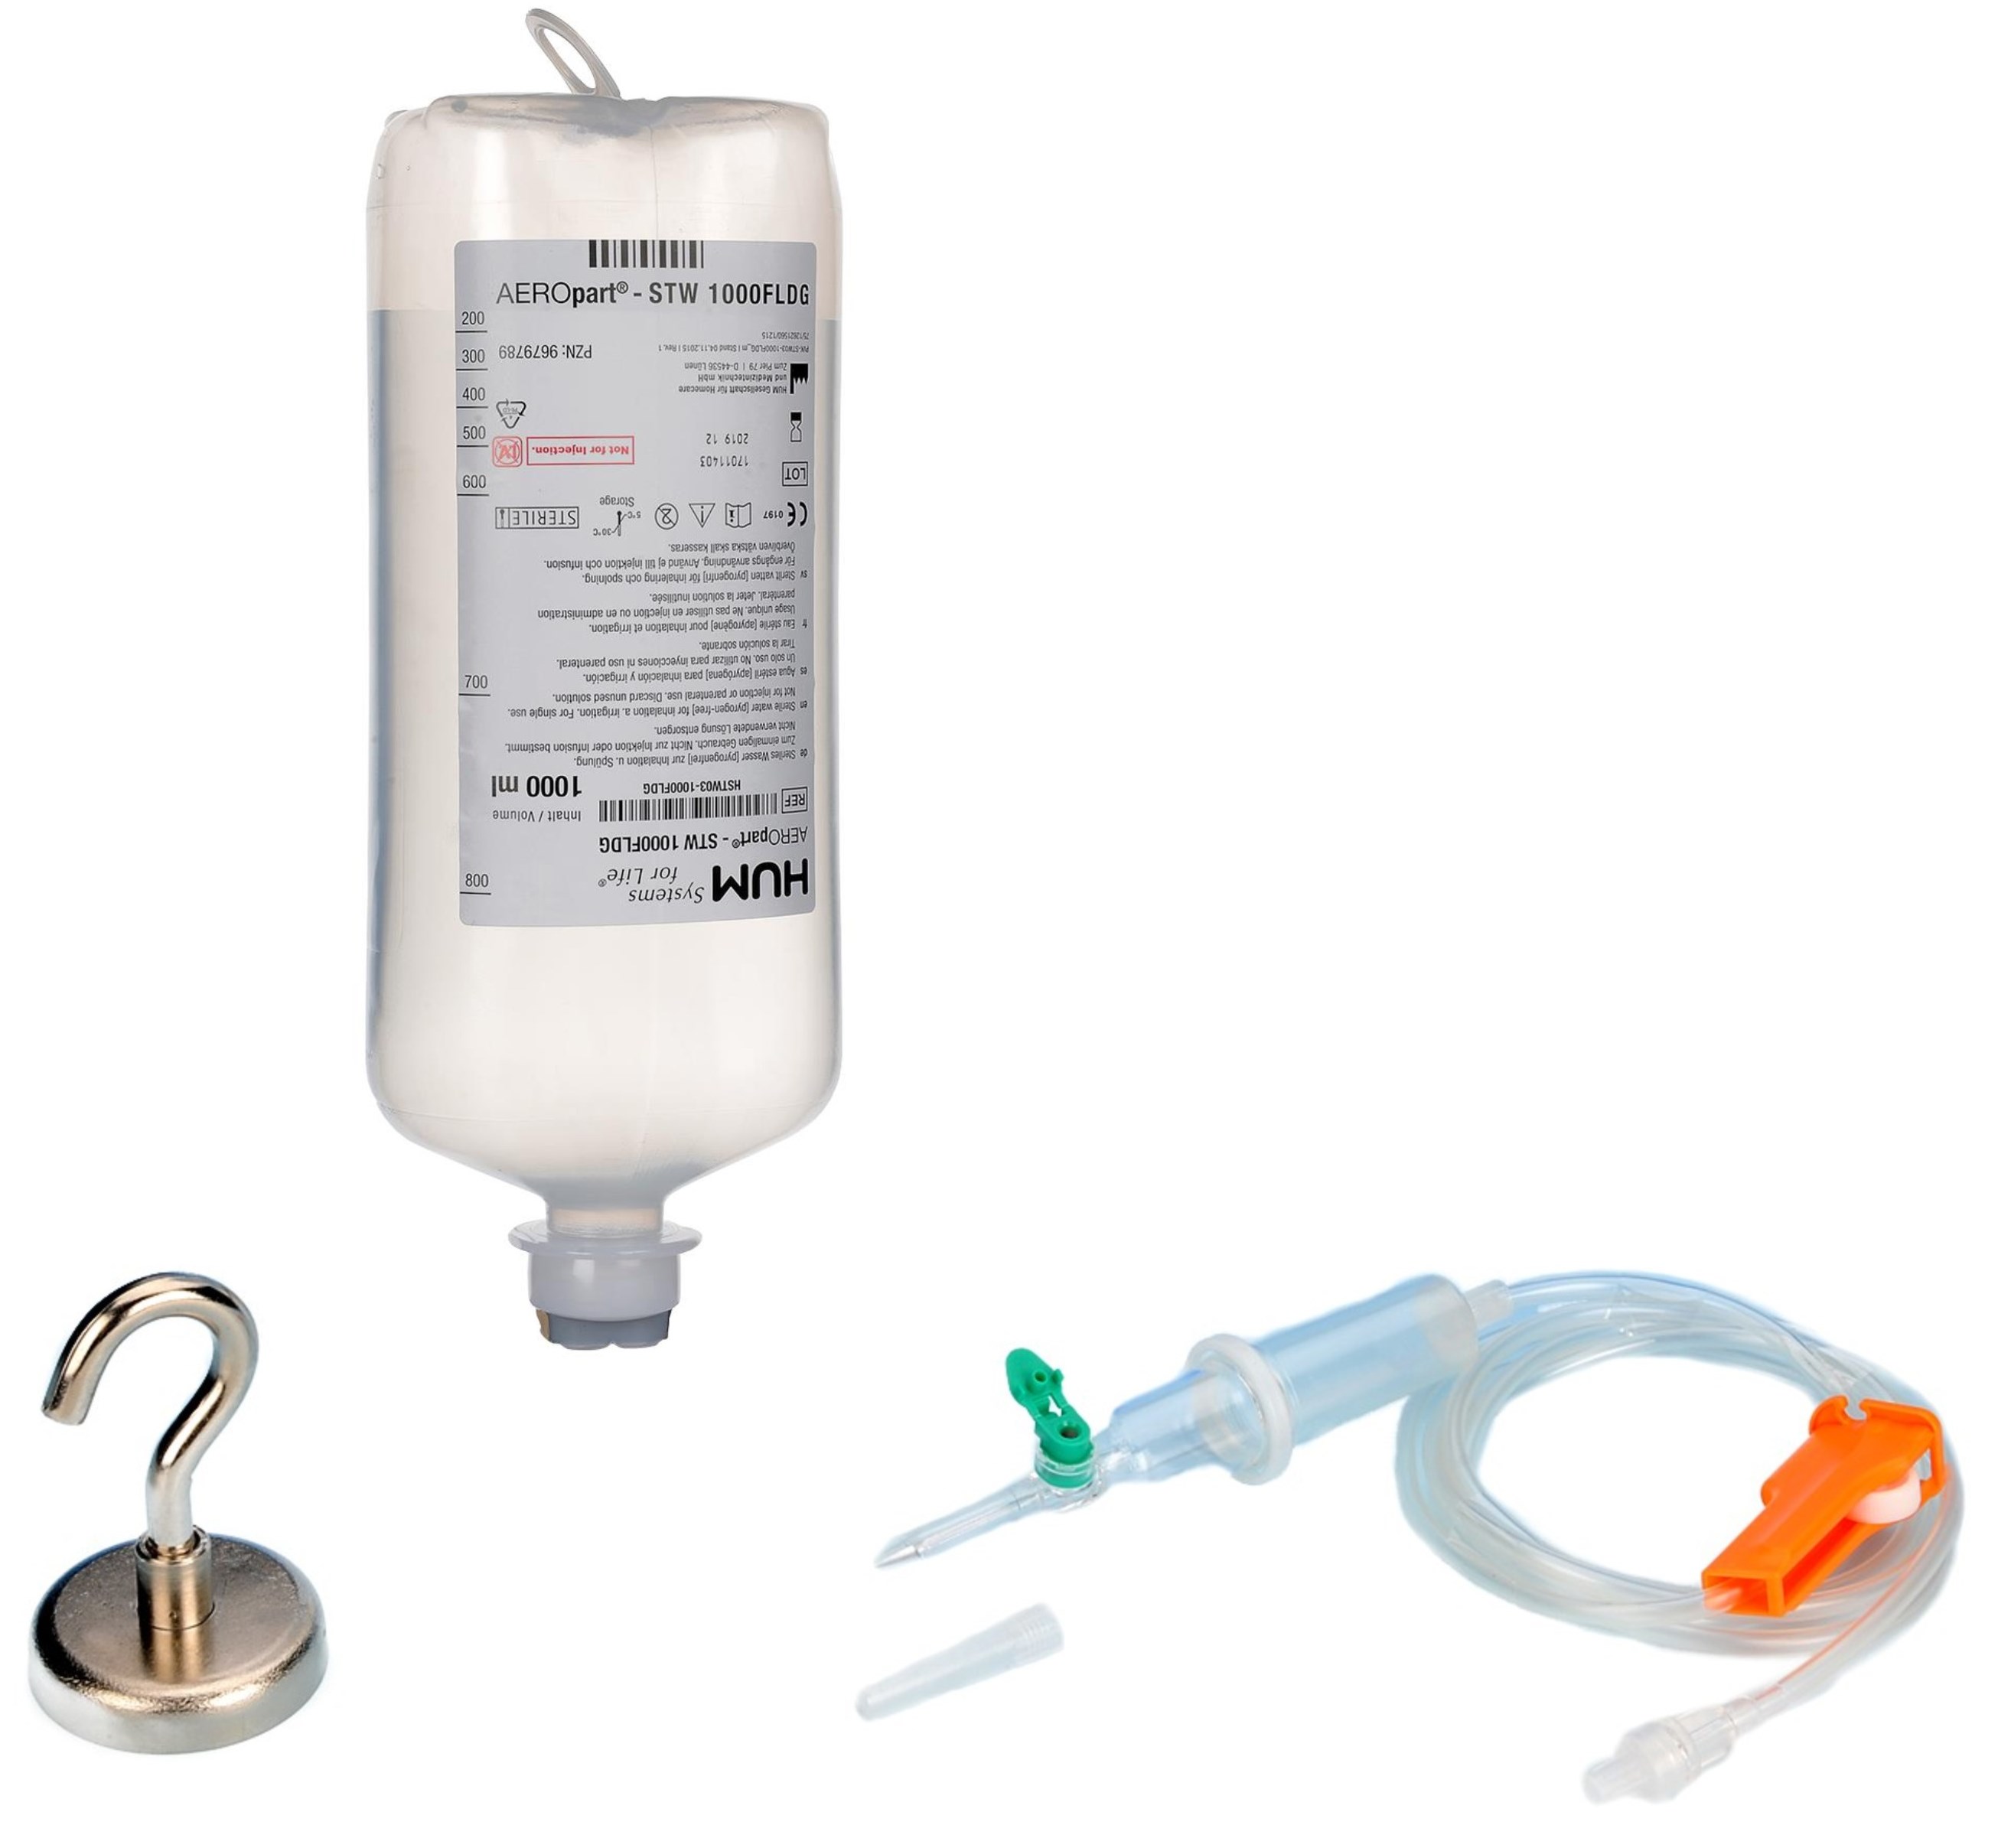 For a full package the magnetic hook and sterile water can be purchased as well